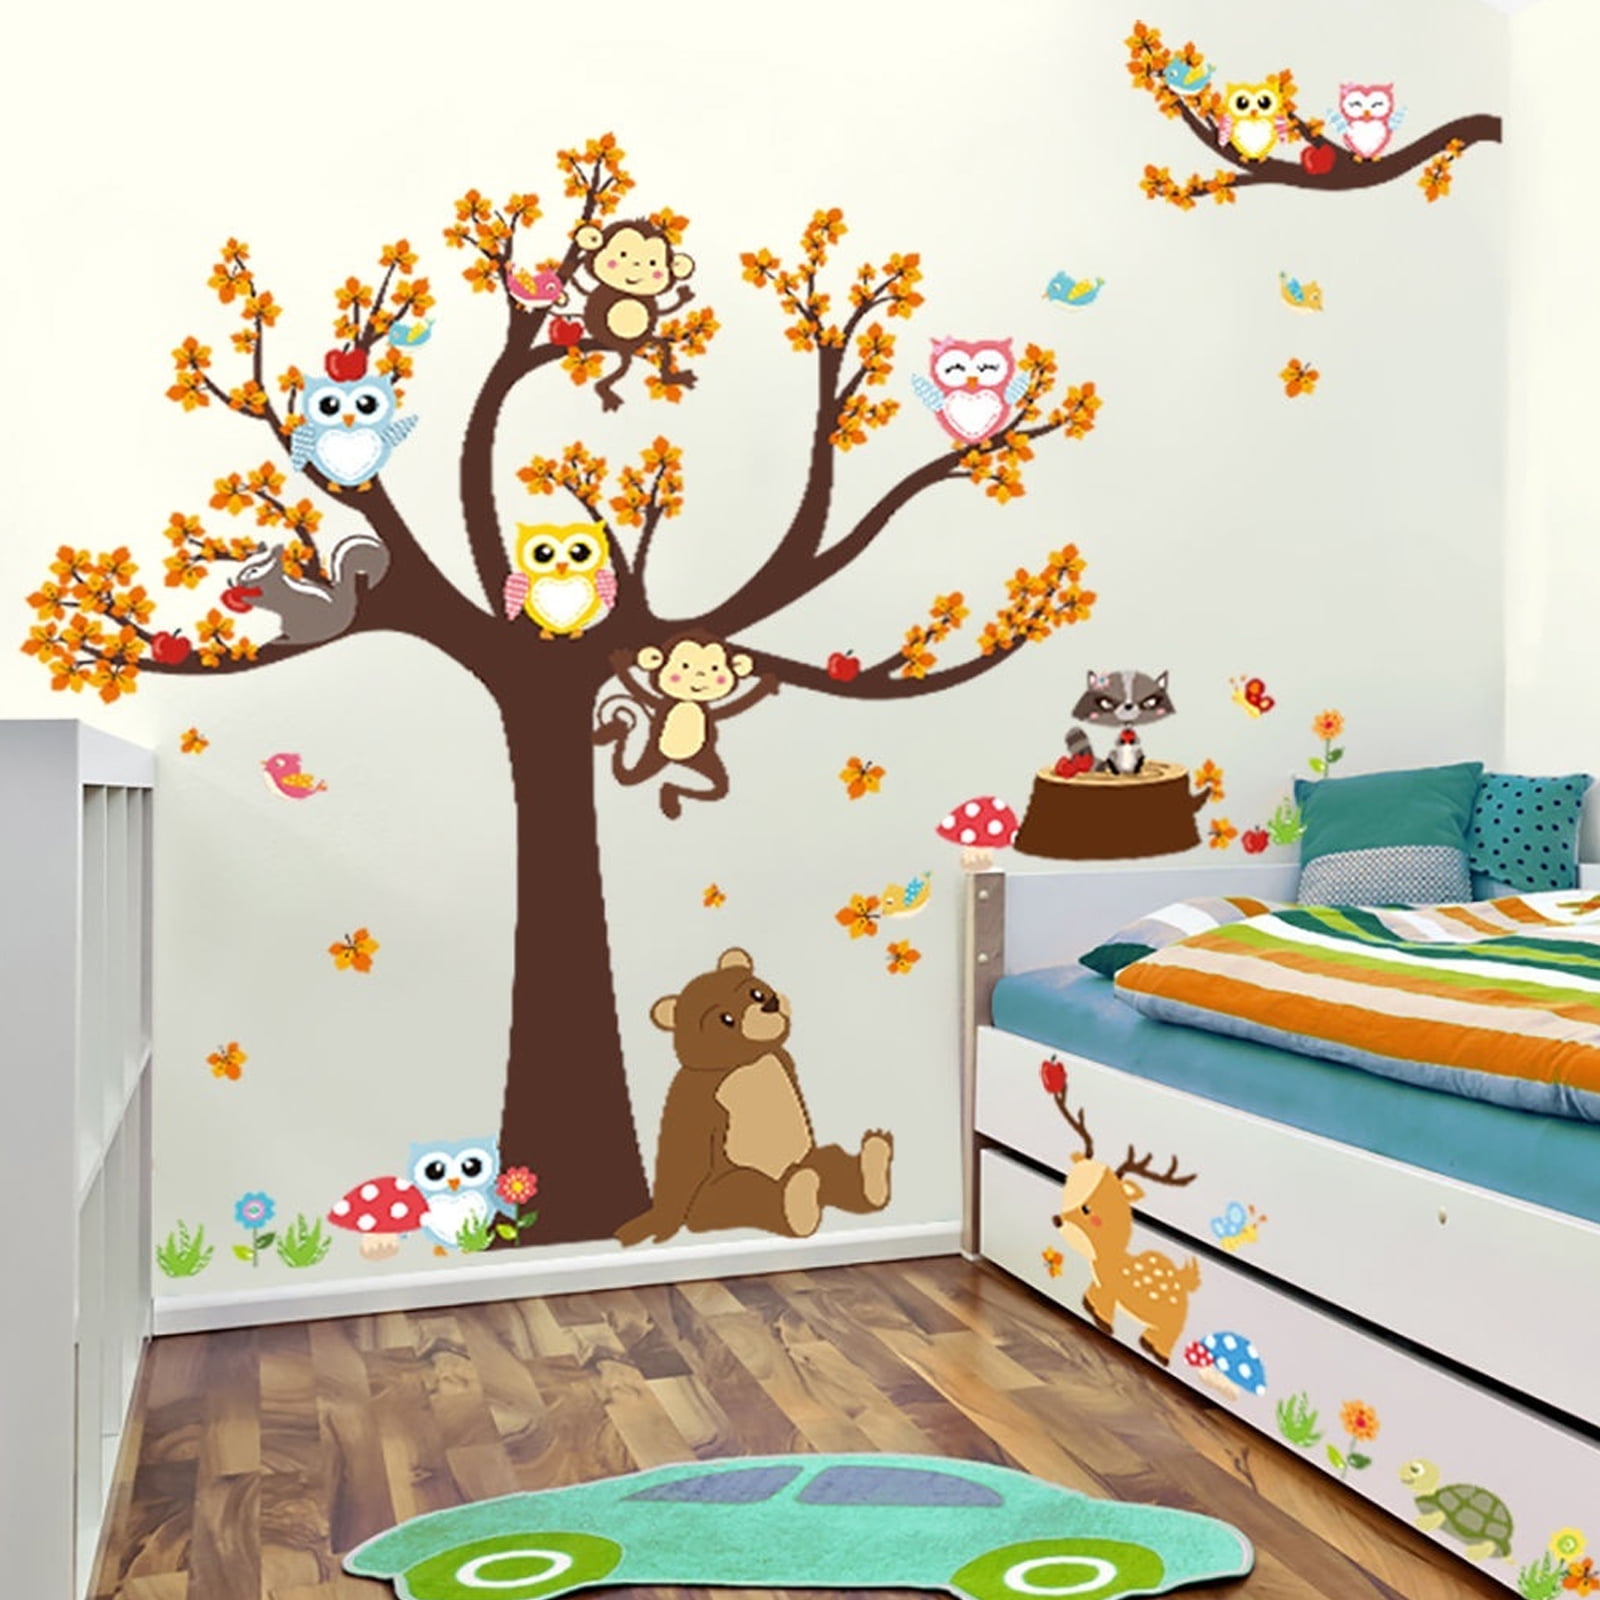 Wall Stickers owl tree xlarge size Decor vinyl Decal Removable Nursery Kids Baby 